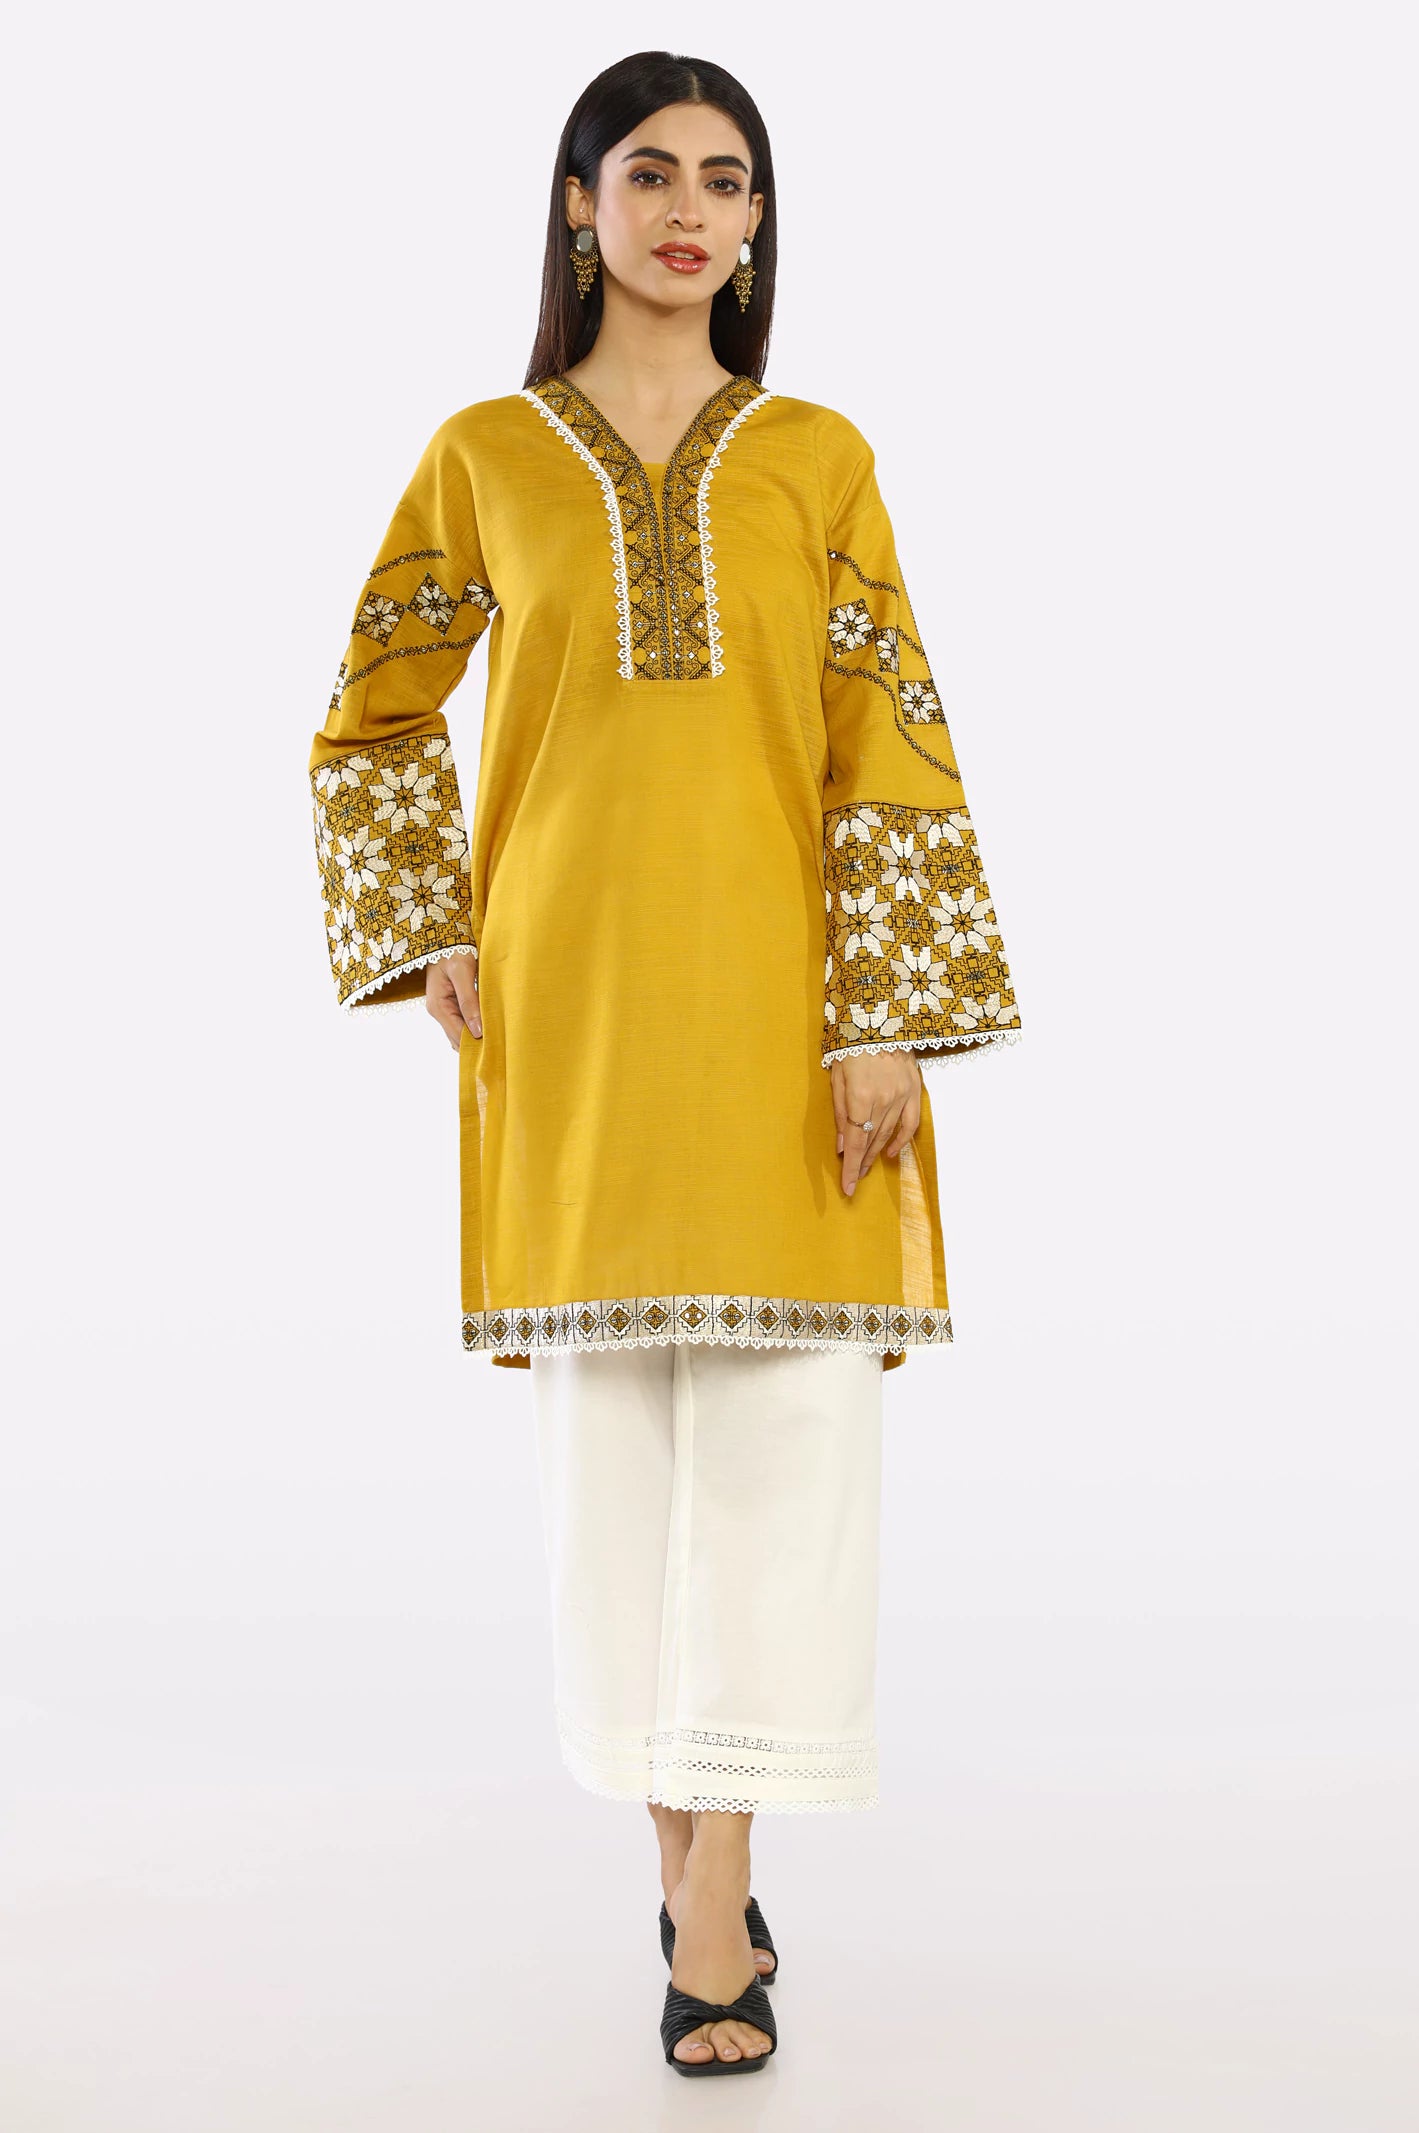 New kurti design 2022 for Girl Latest design at Rs 2450